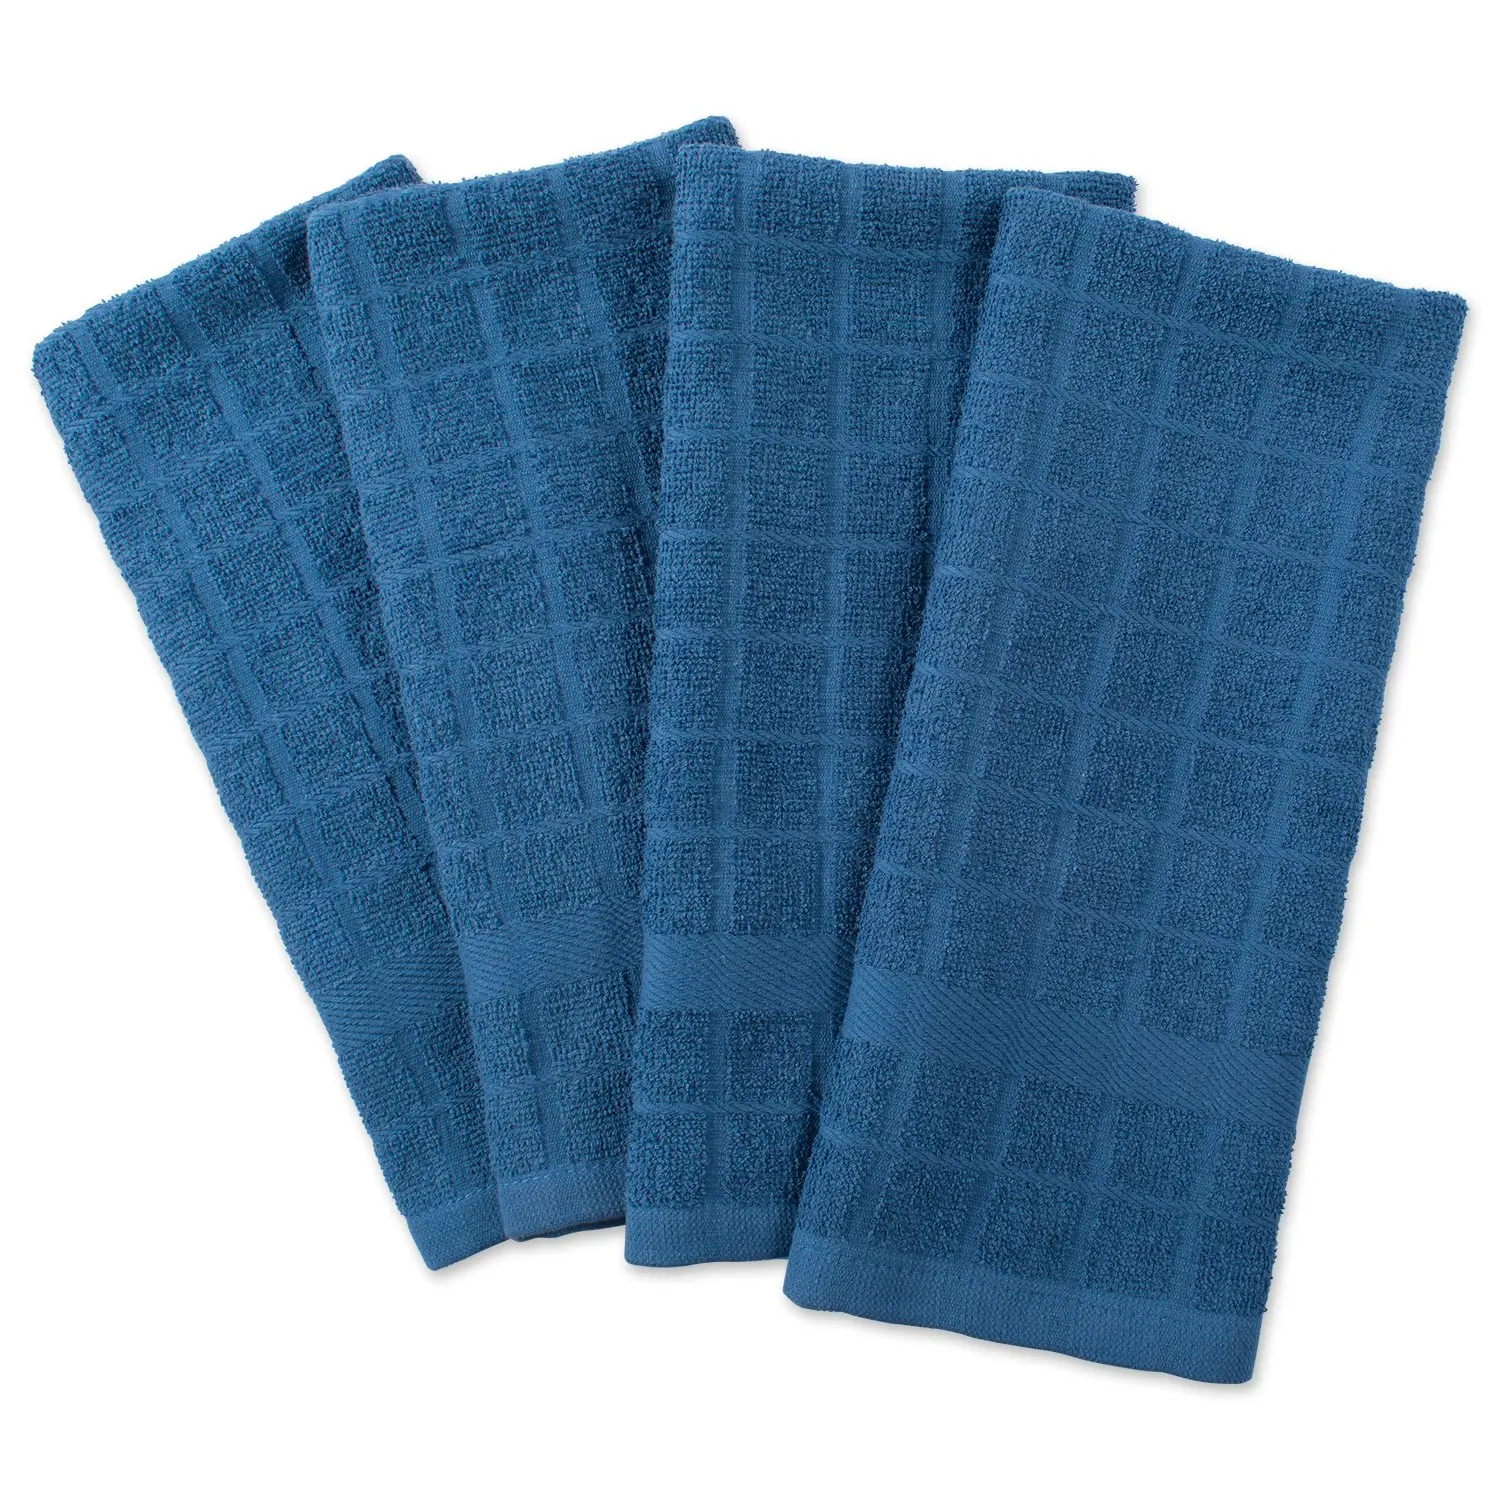 most absorbent kitchen towels